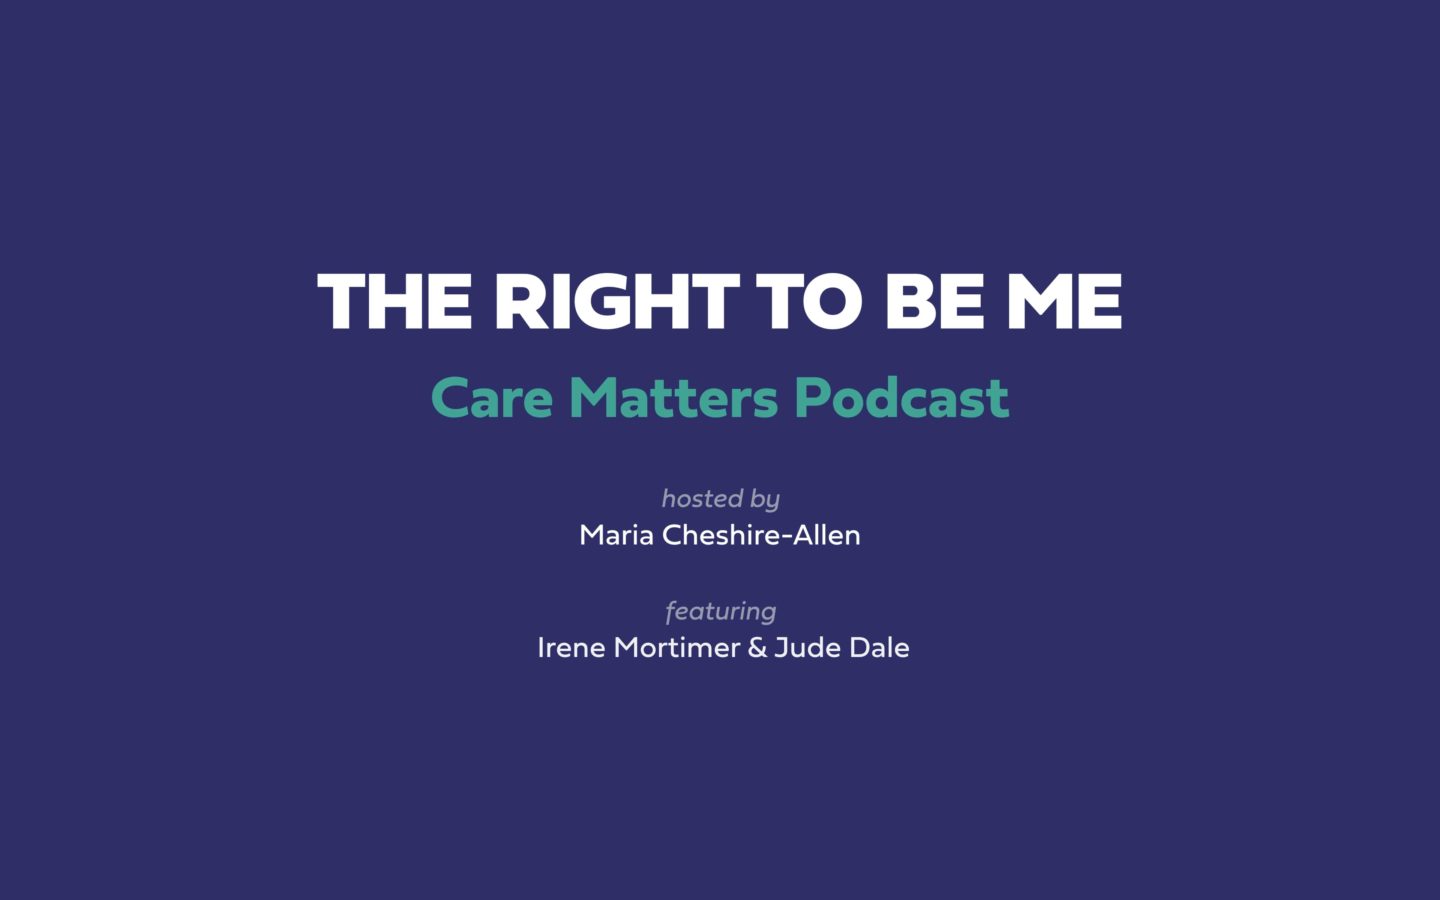 Care Matters Podcast - The right to be me